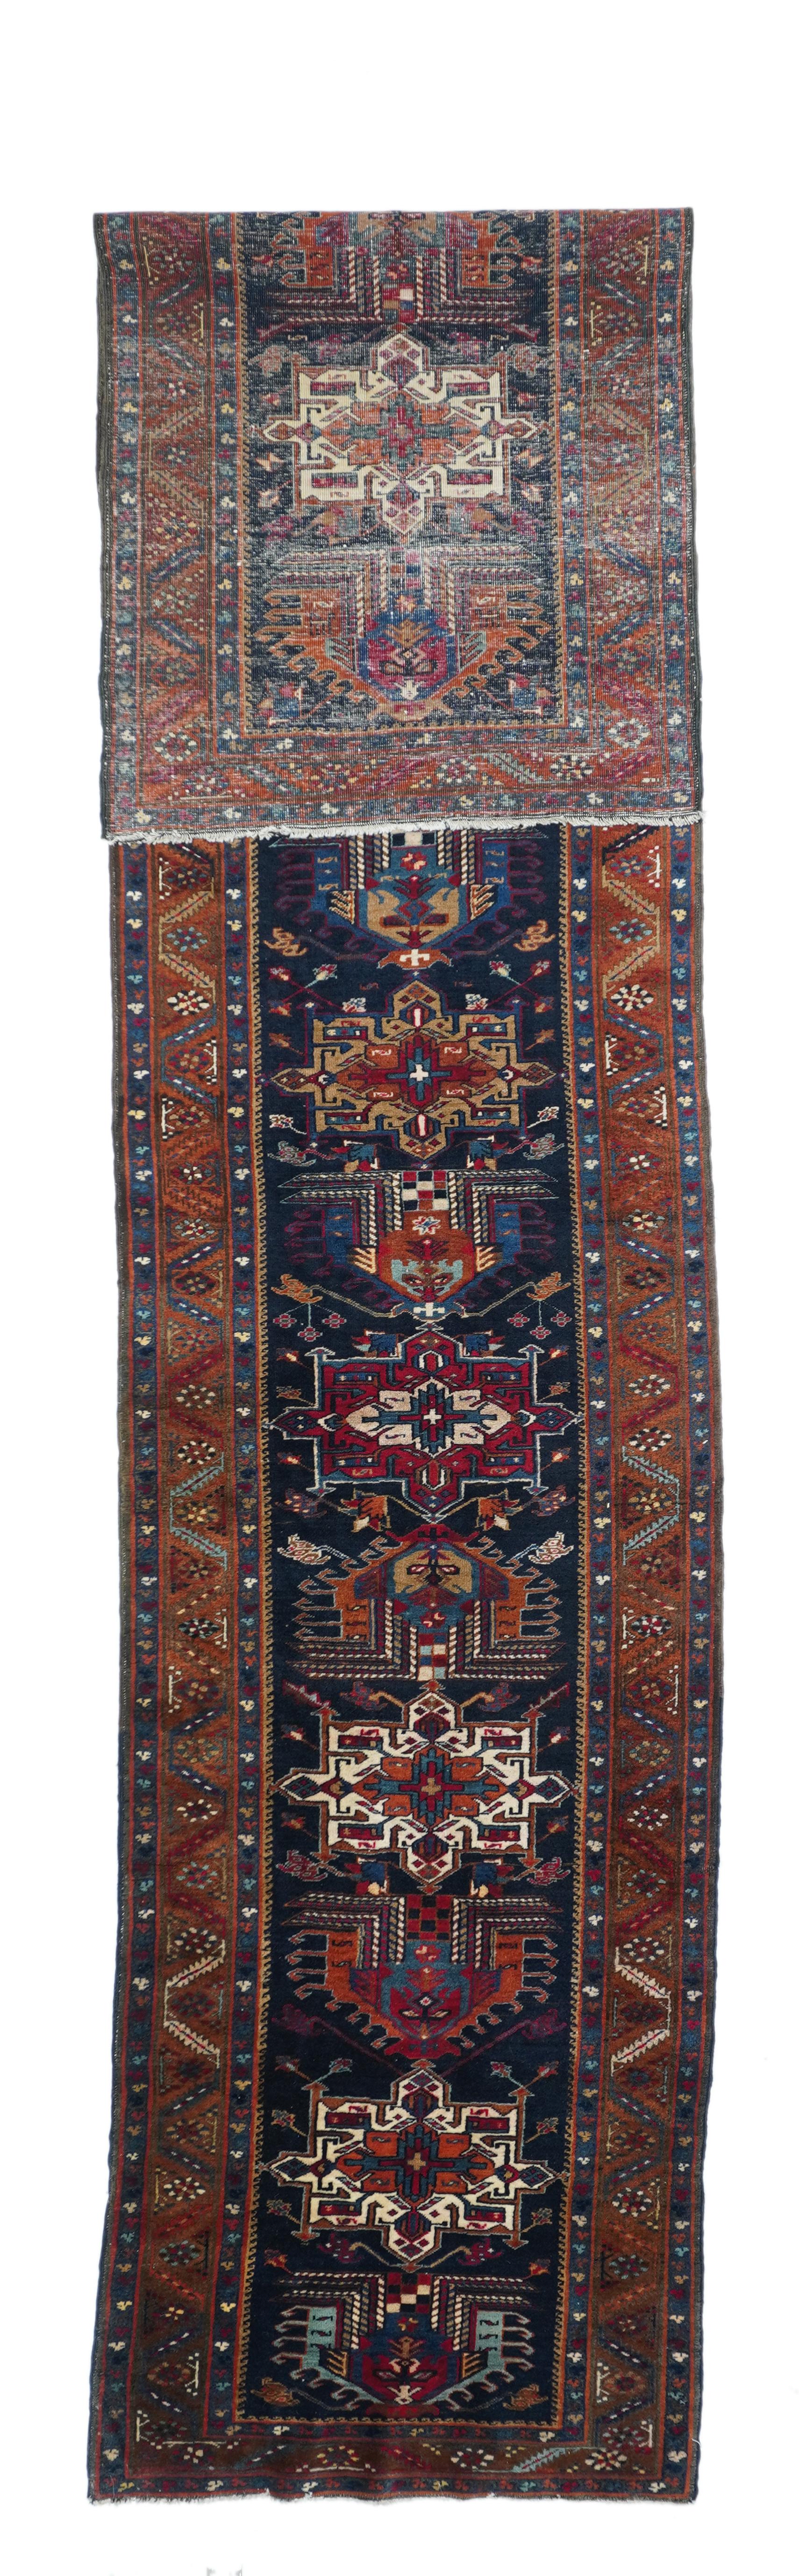 Antique Karajeh Heriz Runner 2'9'' x 14'8''. This narrow, NW Persian runner shows a chain of fifteen characteristic medallions in alternating elaborate palmette and octogramme styles, in red, cream, straw-camel, green and cerulean, all on the navy